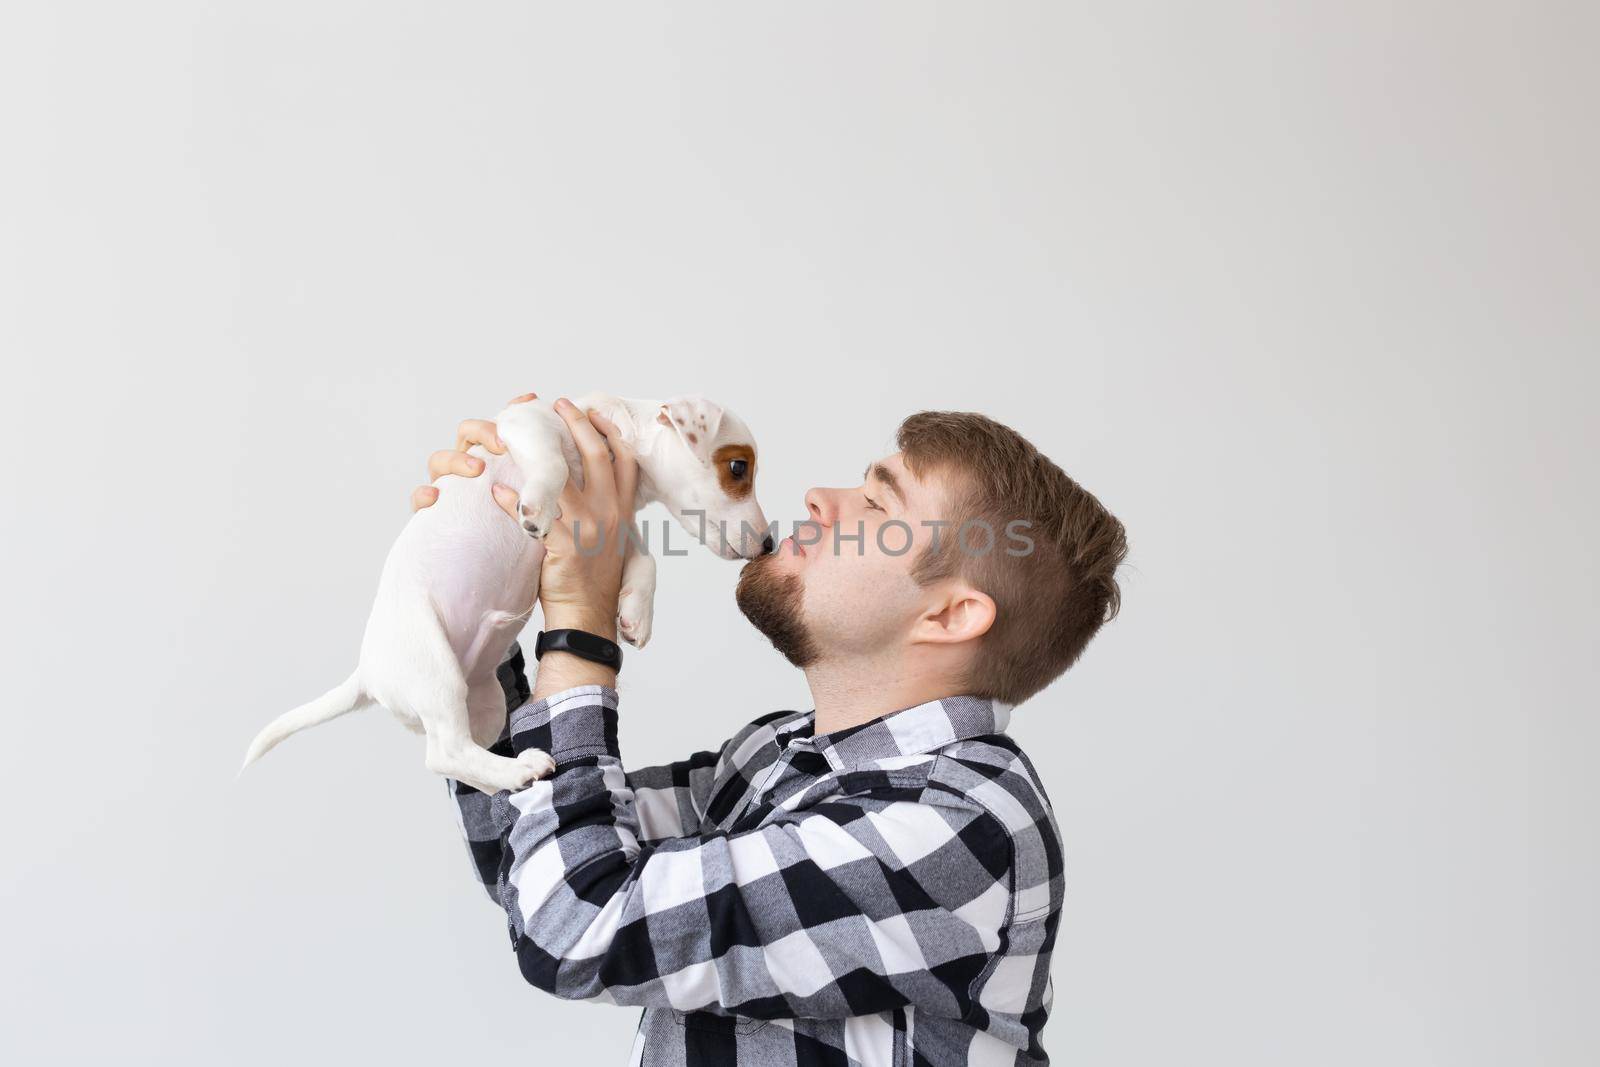 people, pets and animals concept - close up of young man holding jack russell terrier puppy on white background by Satura86